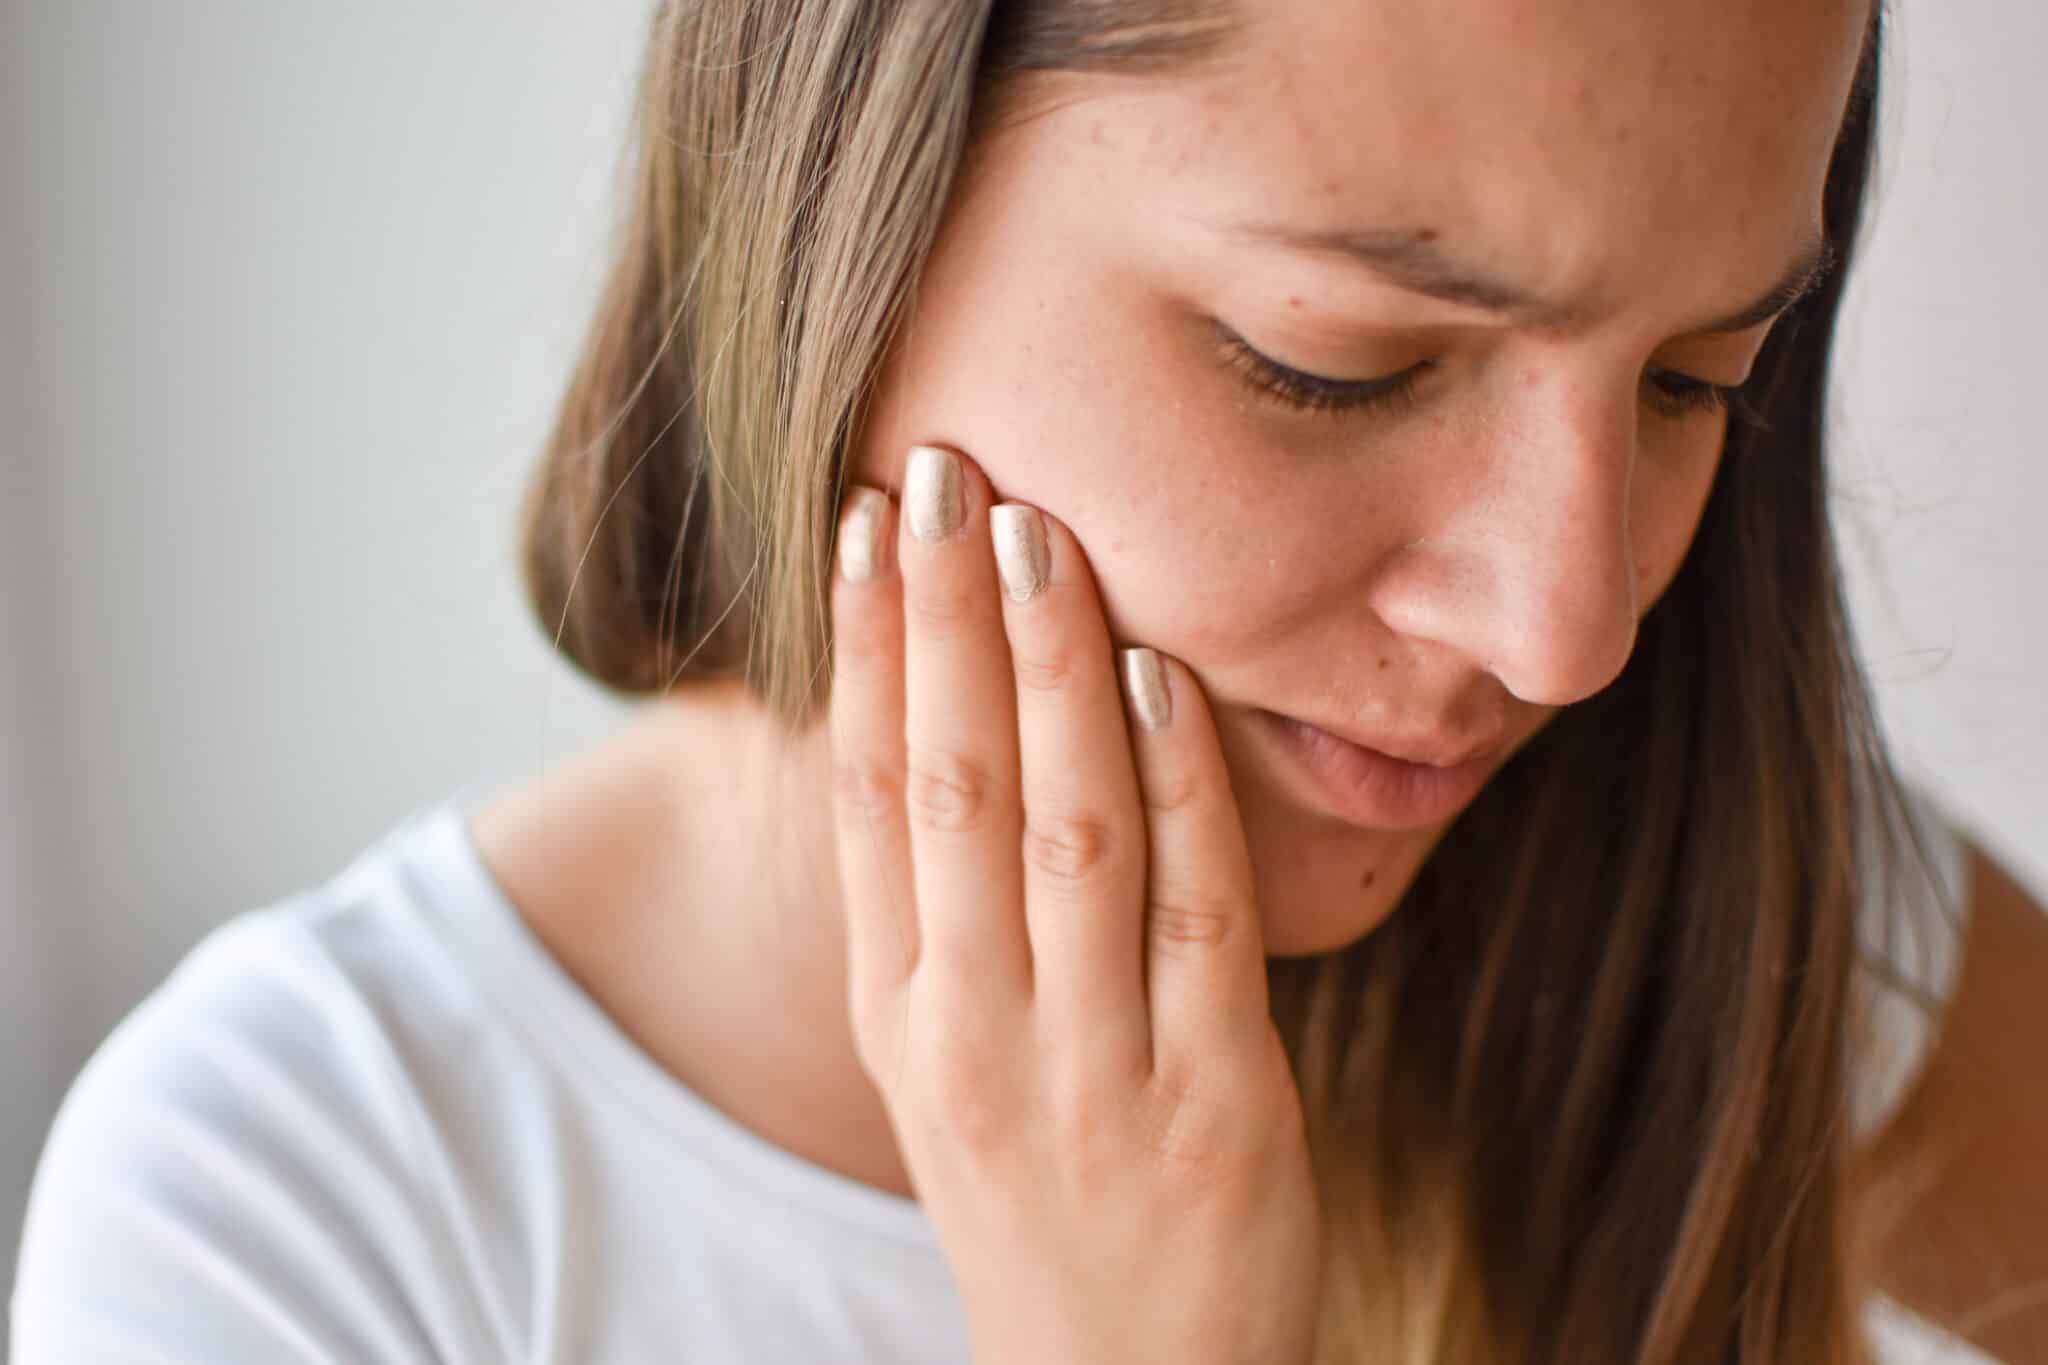 Does TMJ Hurt More at Night?